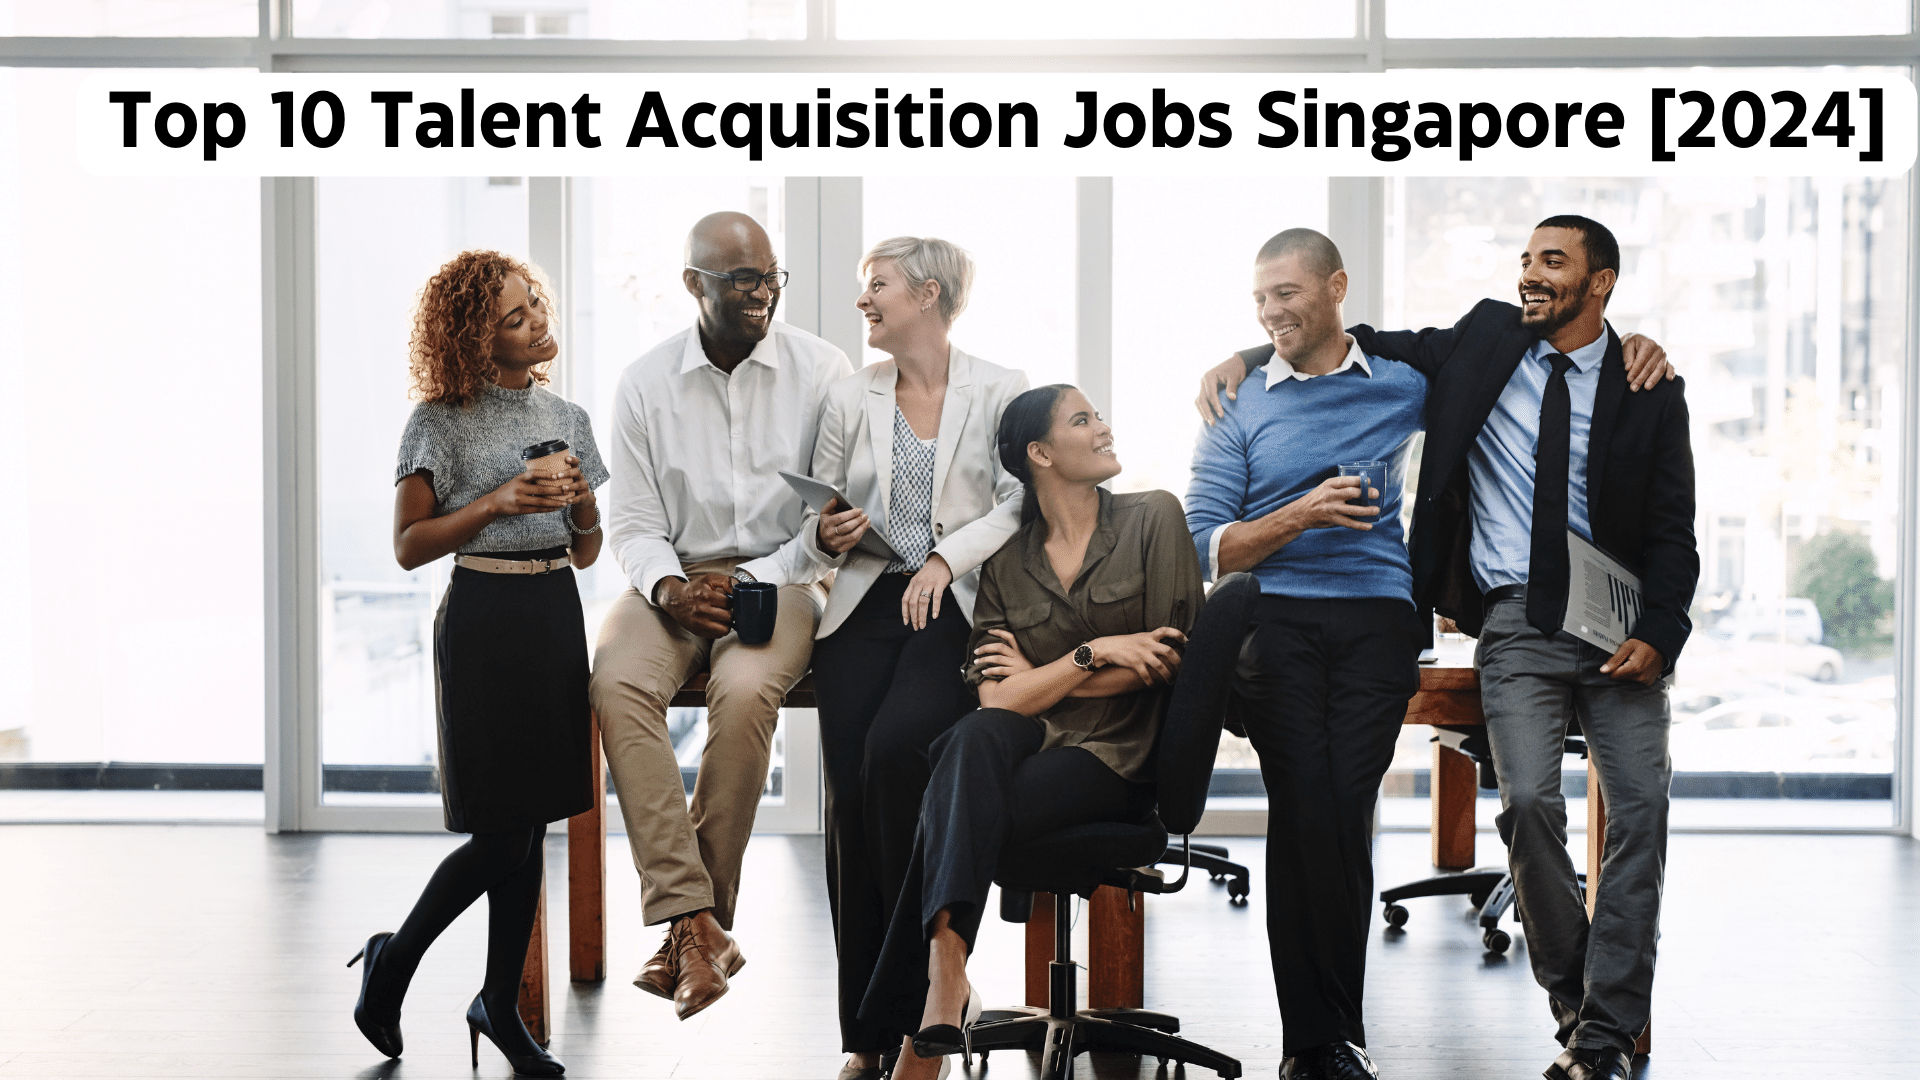 Diverse group of professionals standing and sitting together together, symbolizing the collaborative nature of talent acquisition jobs Singapore. Text overlay: Top 10 Talent Acquisition Jobs Singapore [2024].